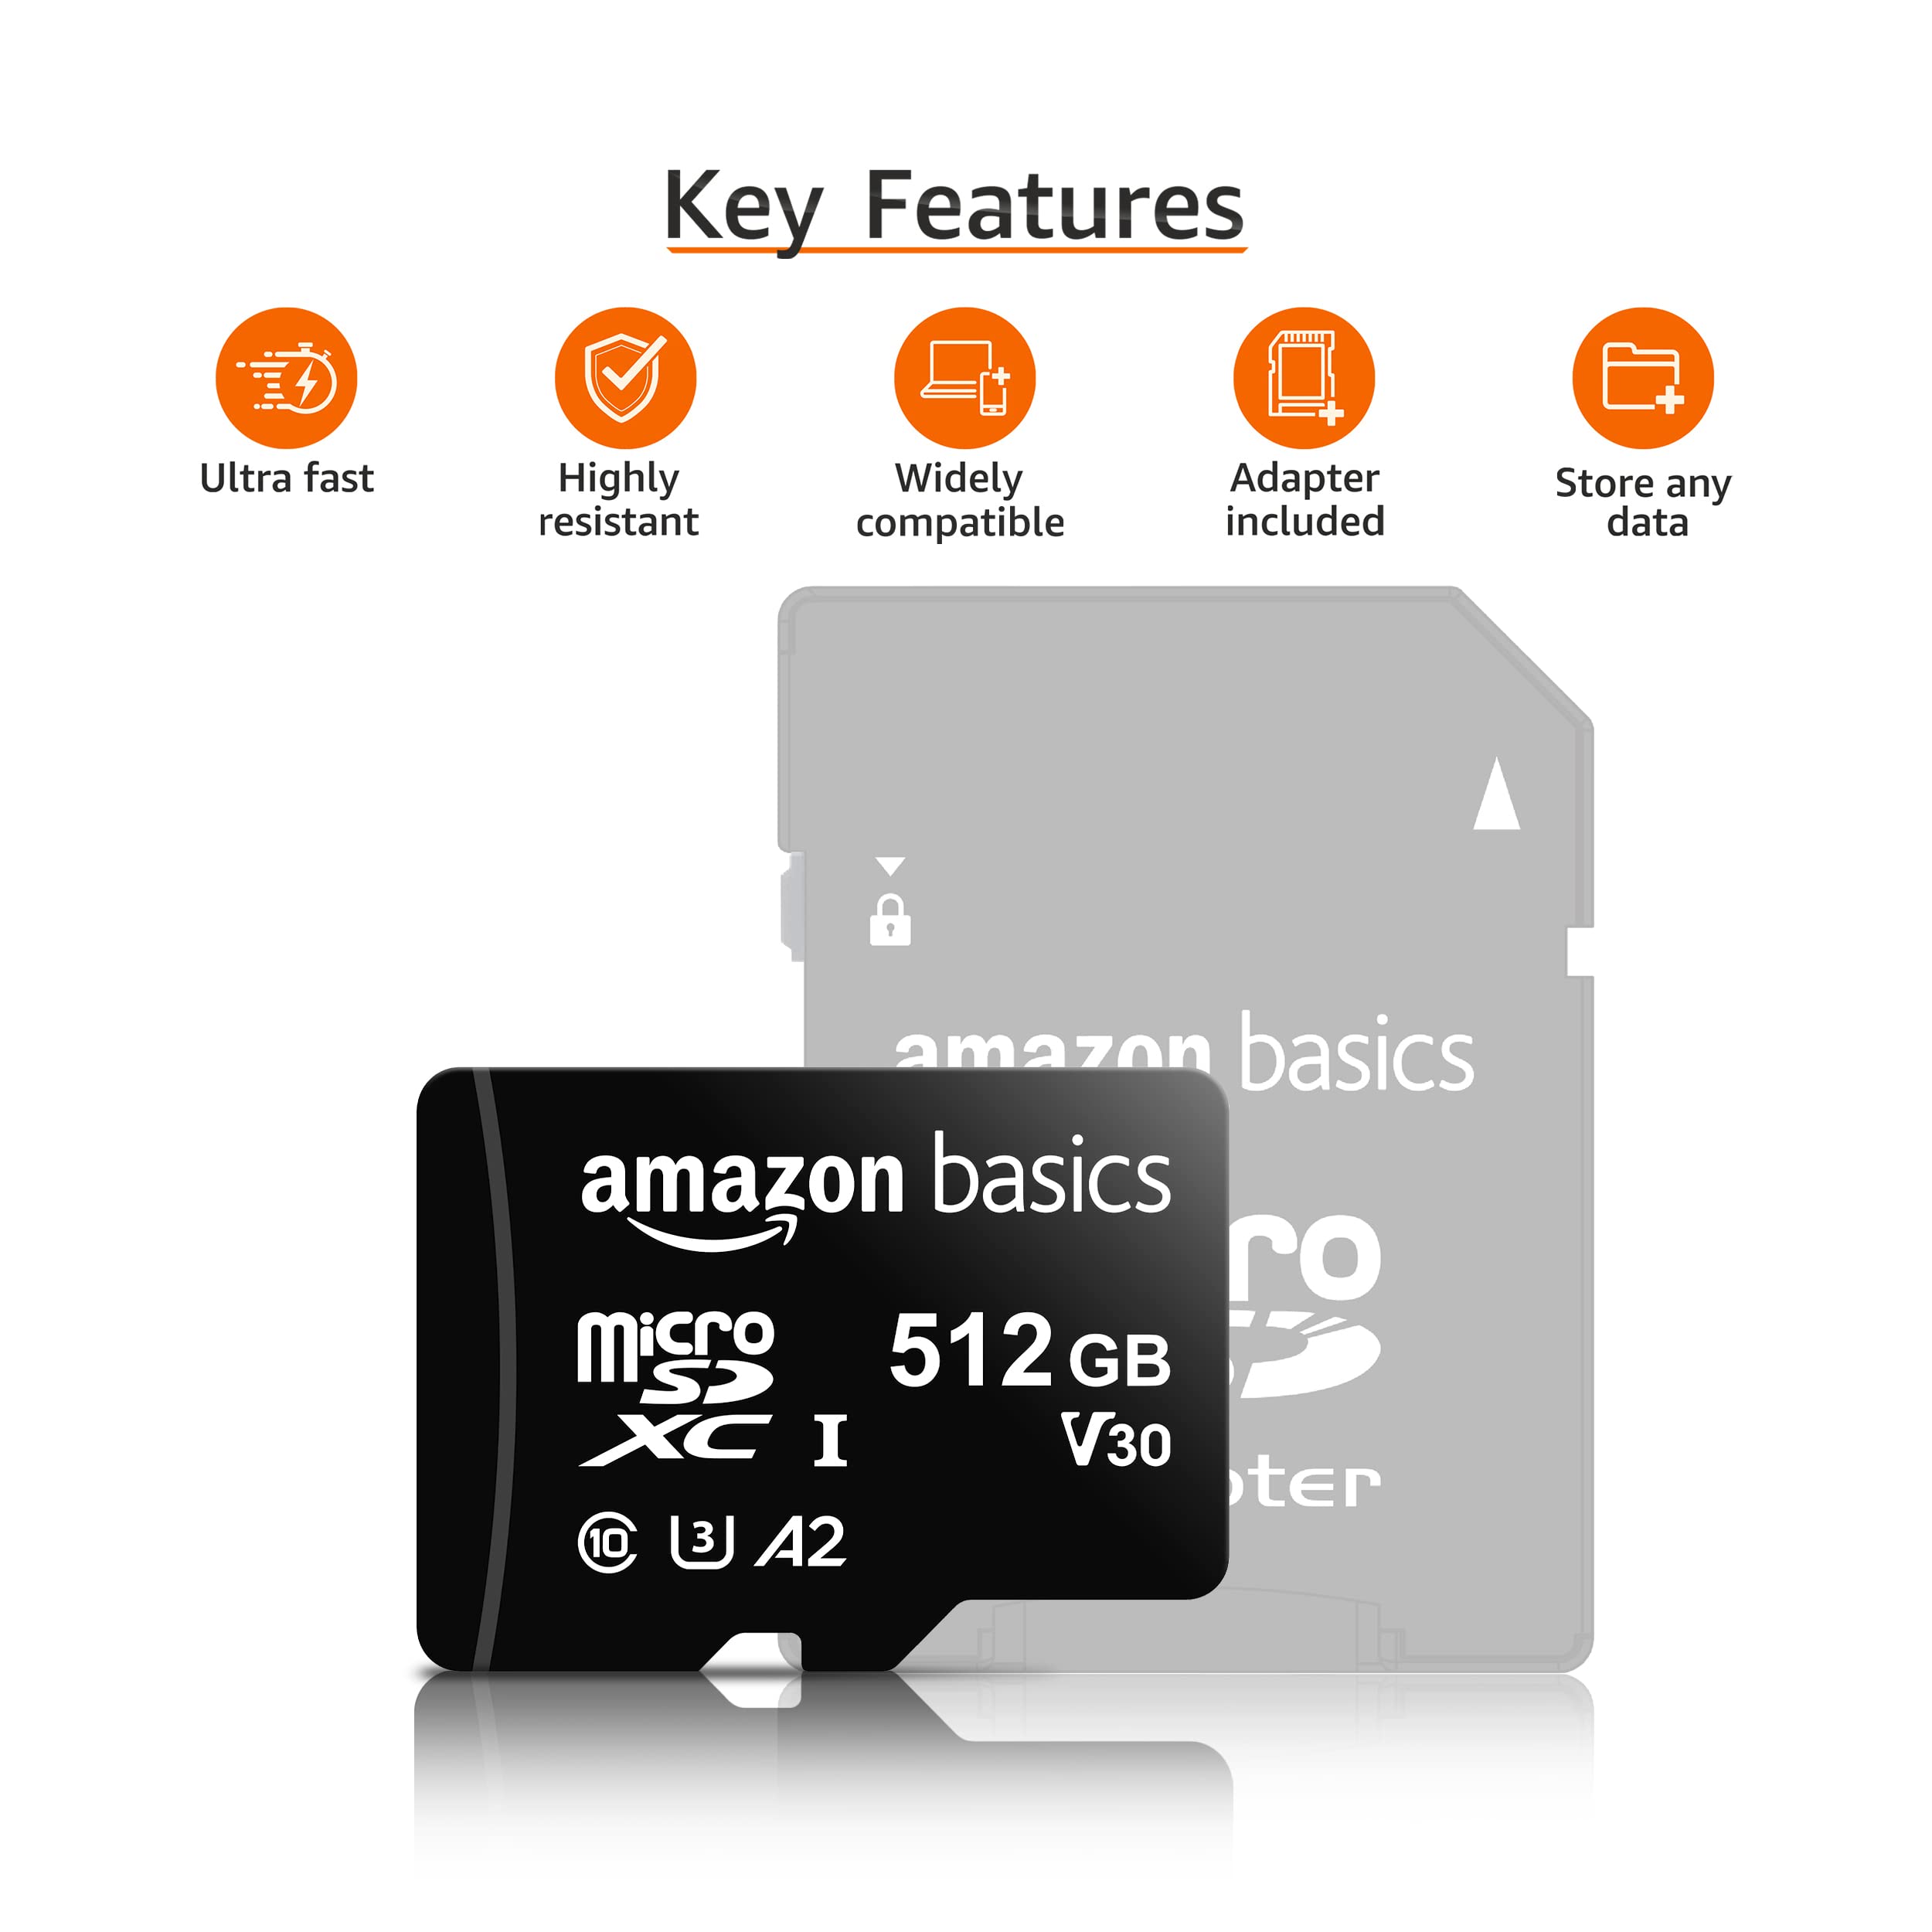 Amazon Basics microSDXC Memory Card with Full Size Adapter, A2, U3, Read Speed up to 100 MB/s, 512 GB, Black